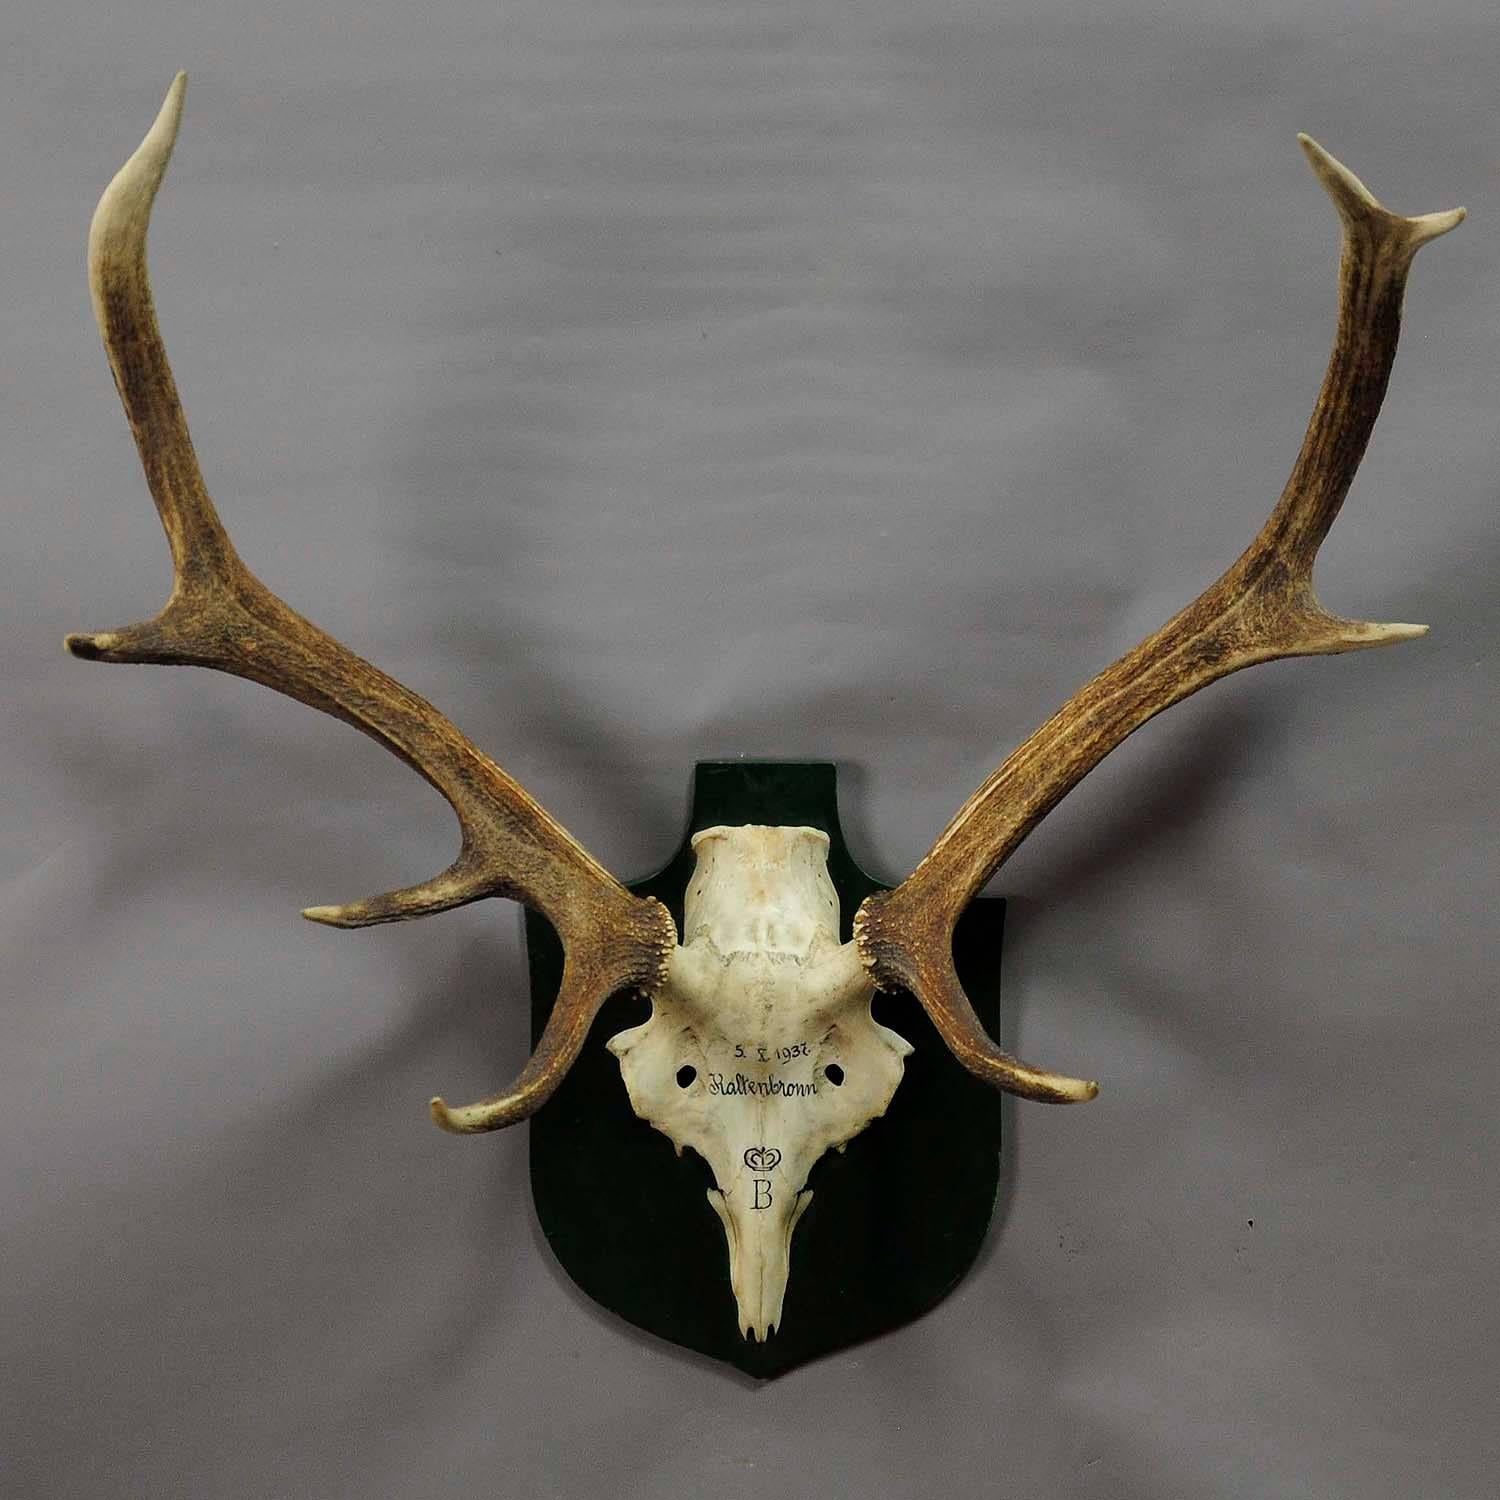 An eight pointer black forest deer trophy from the palace of Salem in South Germany. Shoot by a member of the lordly family of Badenin, 1937. Handwritten inscriptions on the skull with, place of the hunt and date 1937. Mounted on a wooden plaque,